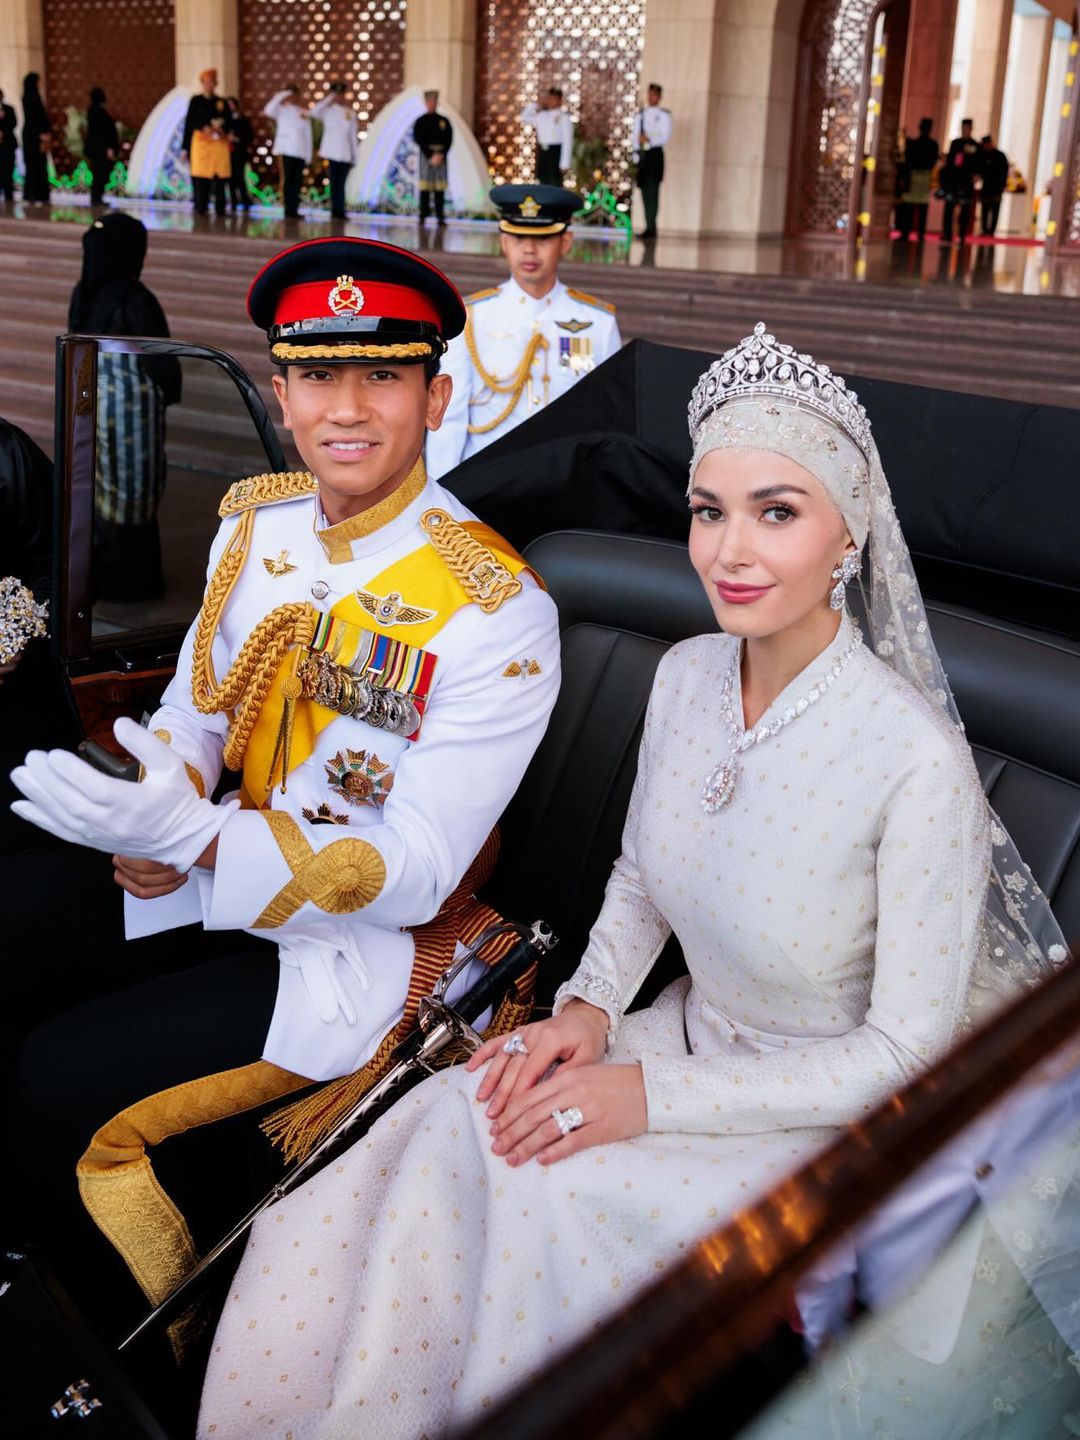 Princess Anisha and husband Prince Mateen pose in their wedding day outfits while in a carriage 